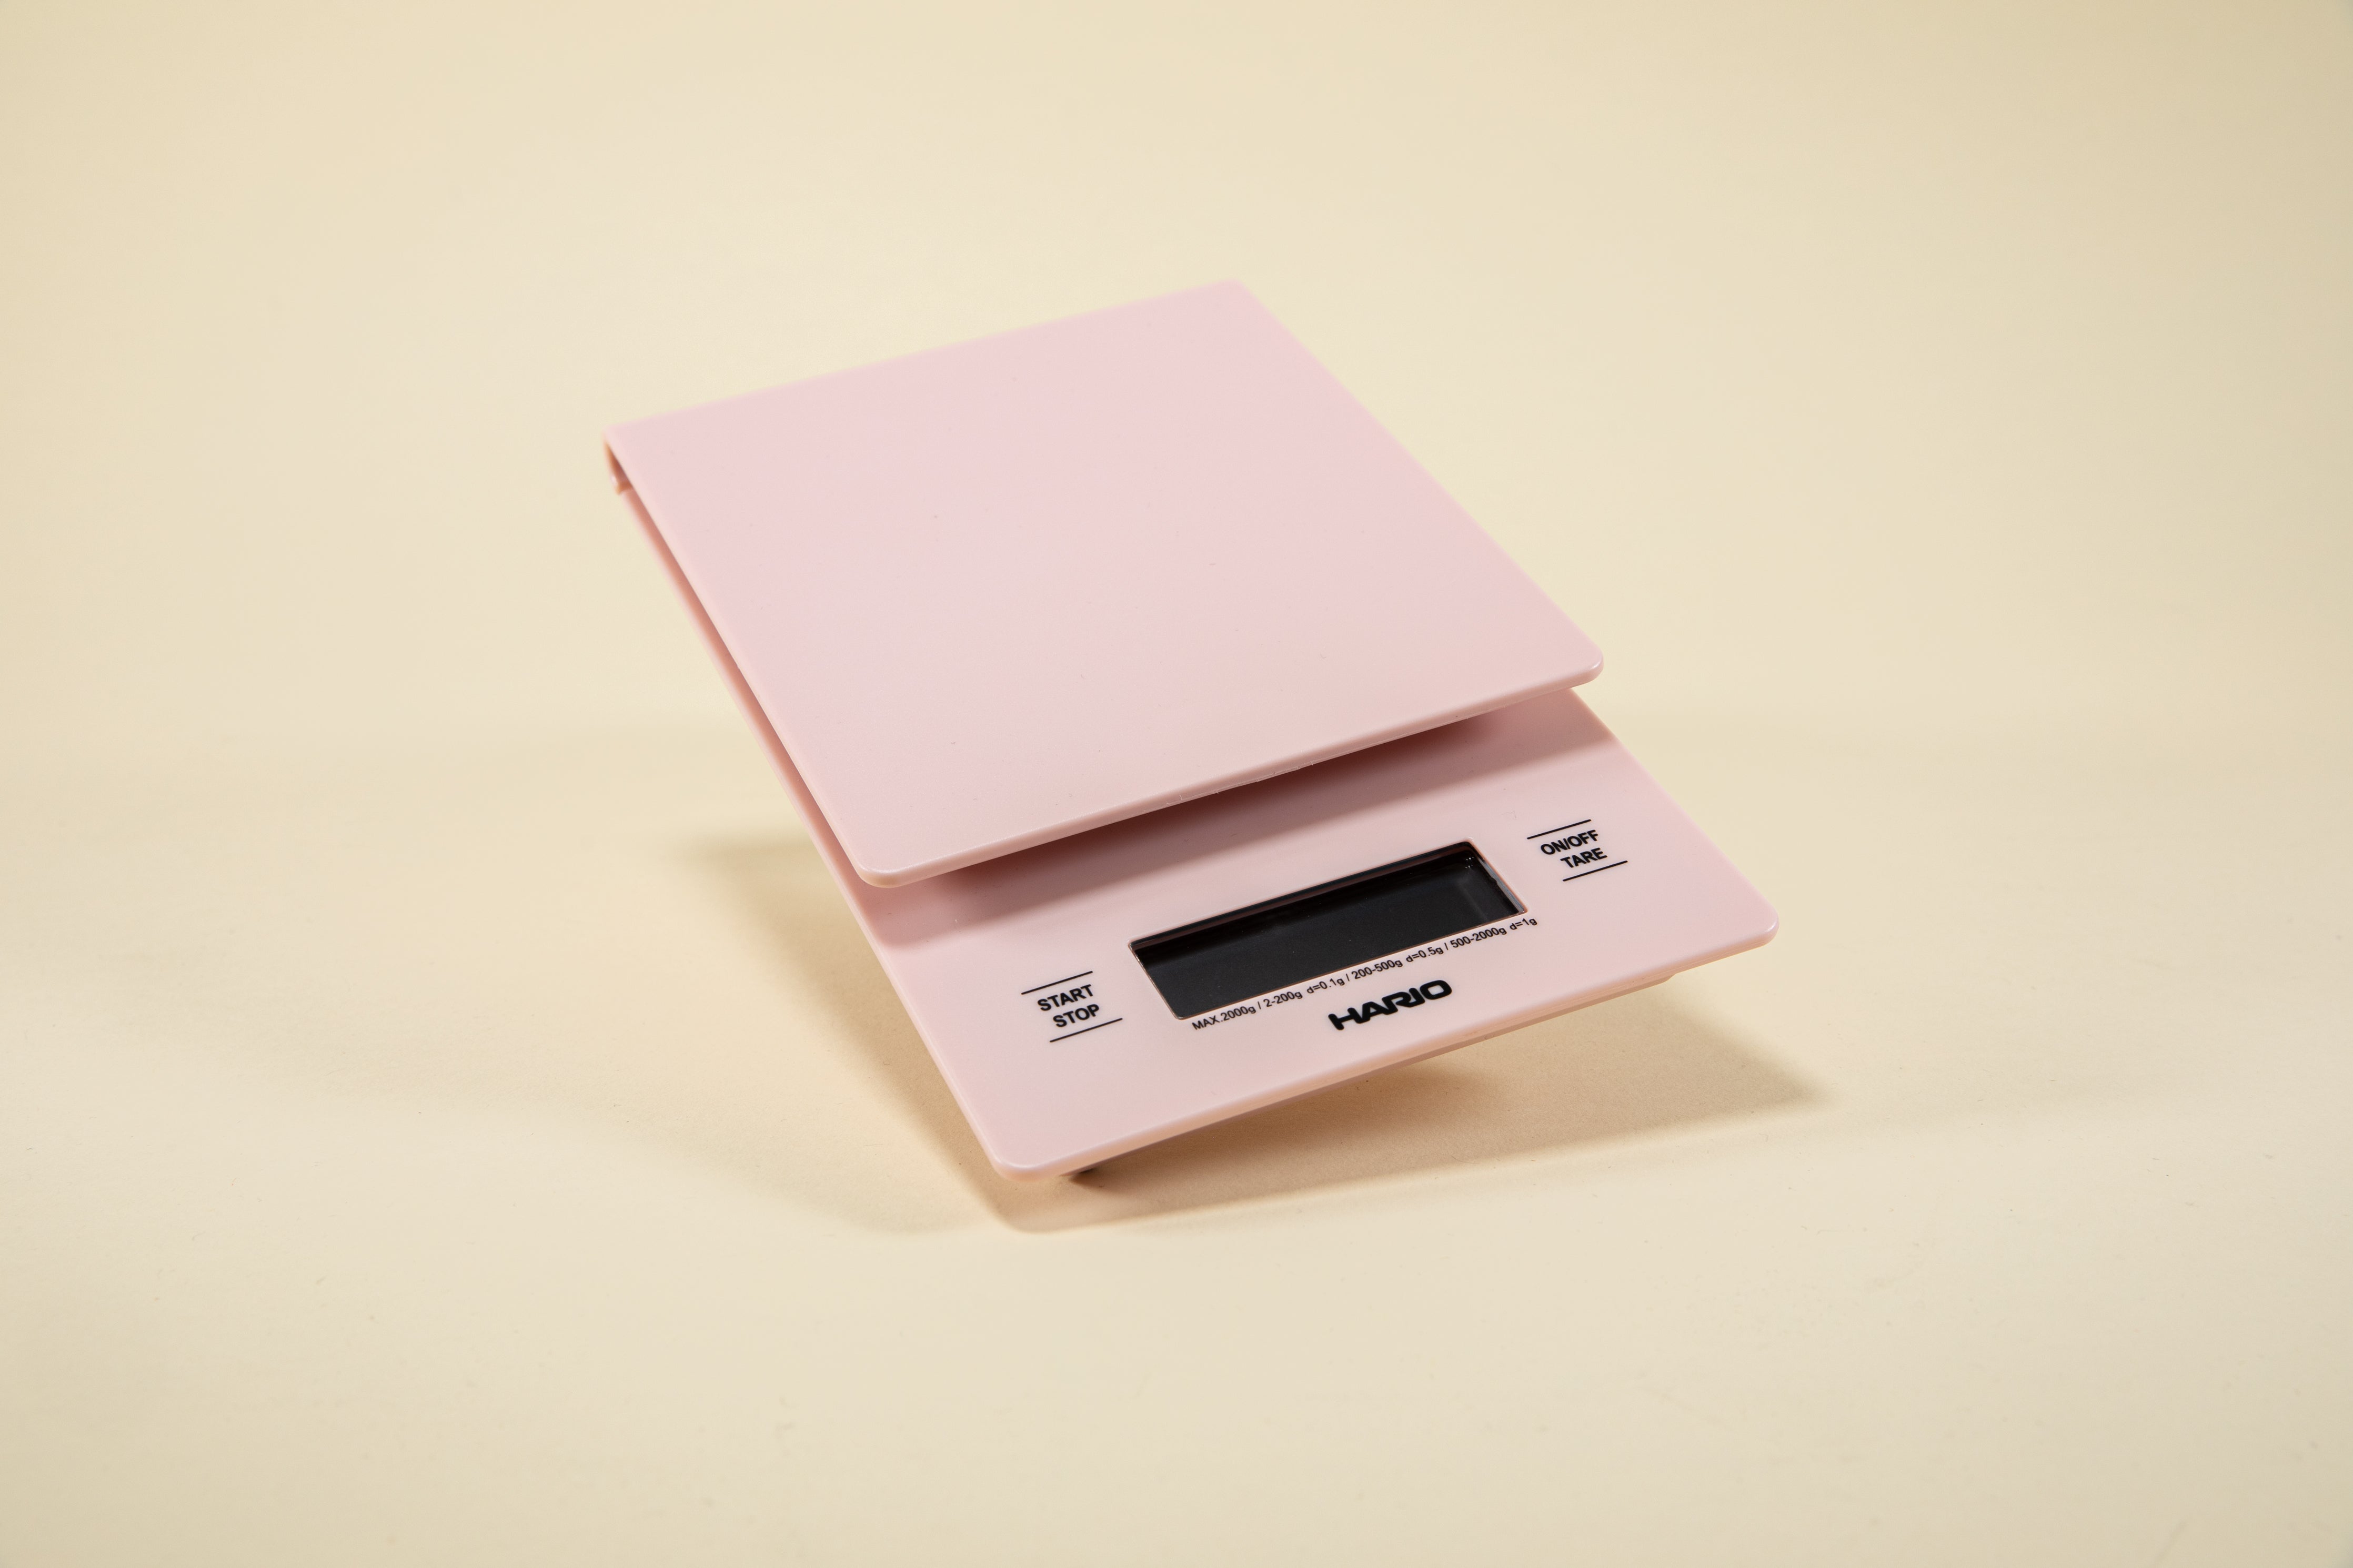 V60 Drip Scale Pink